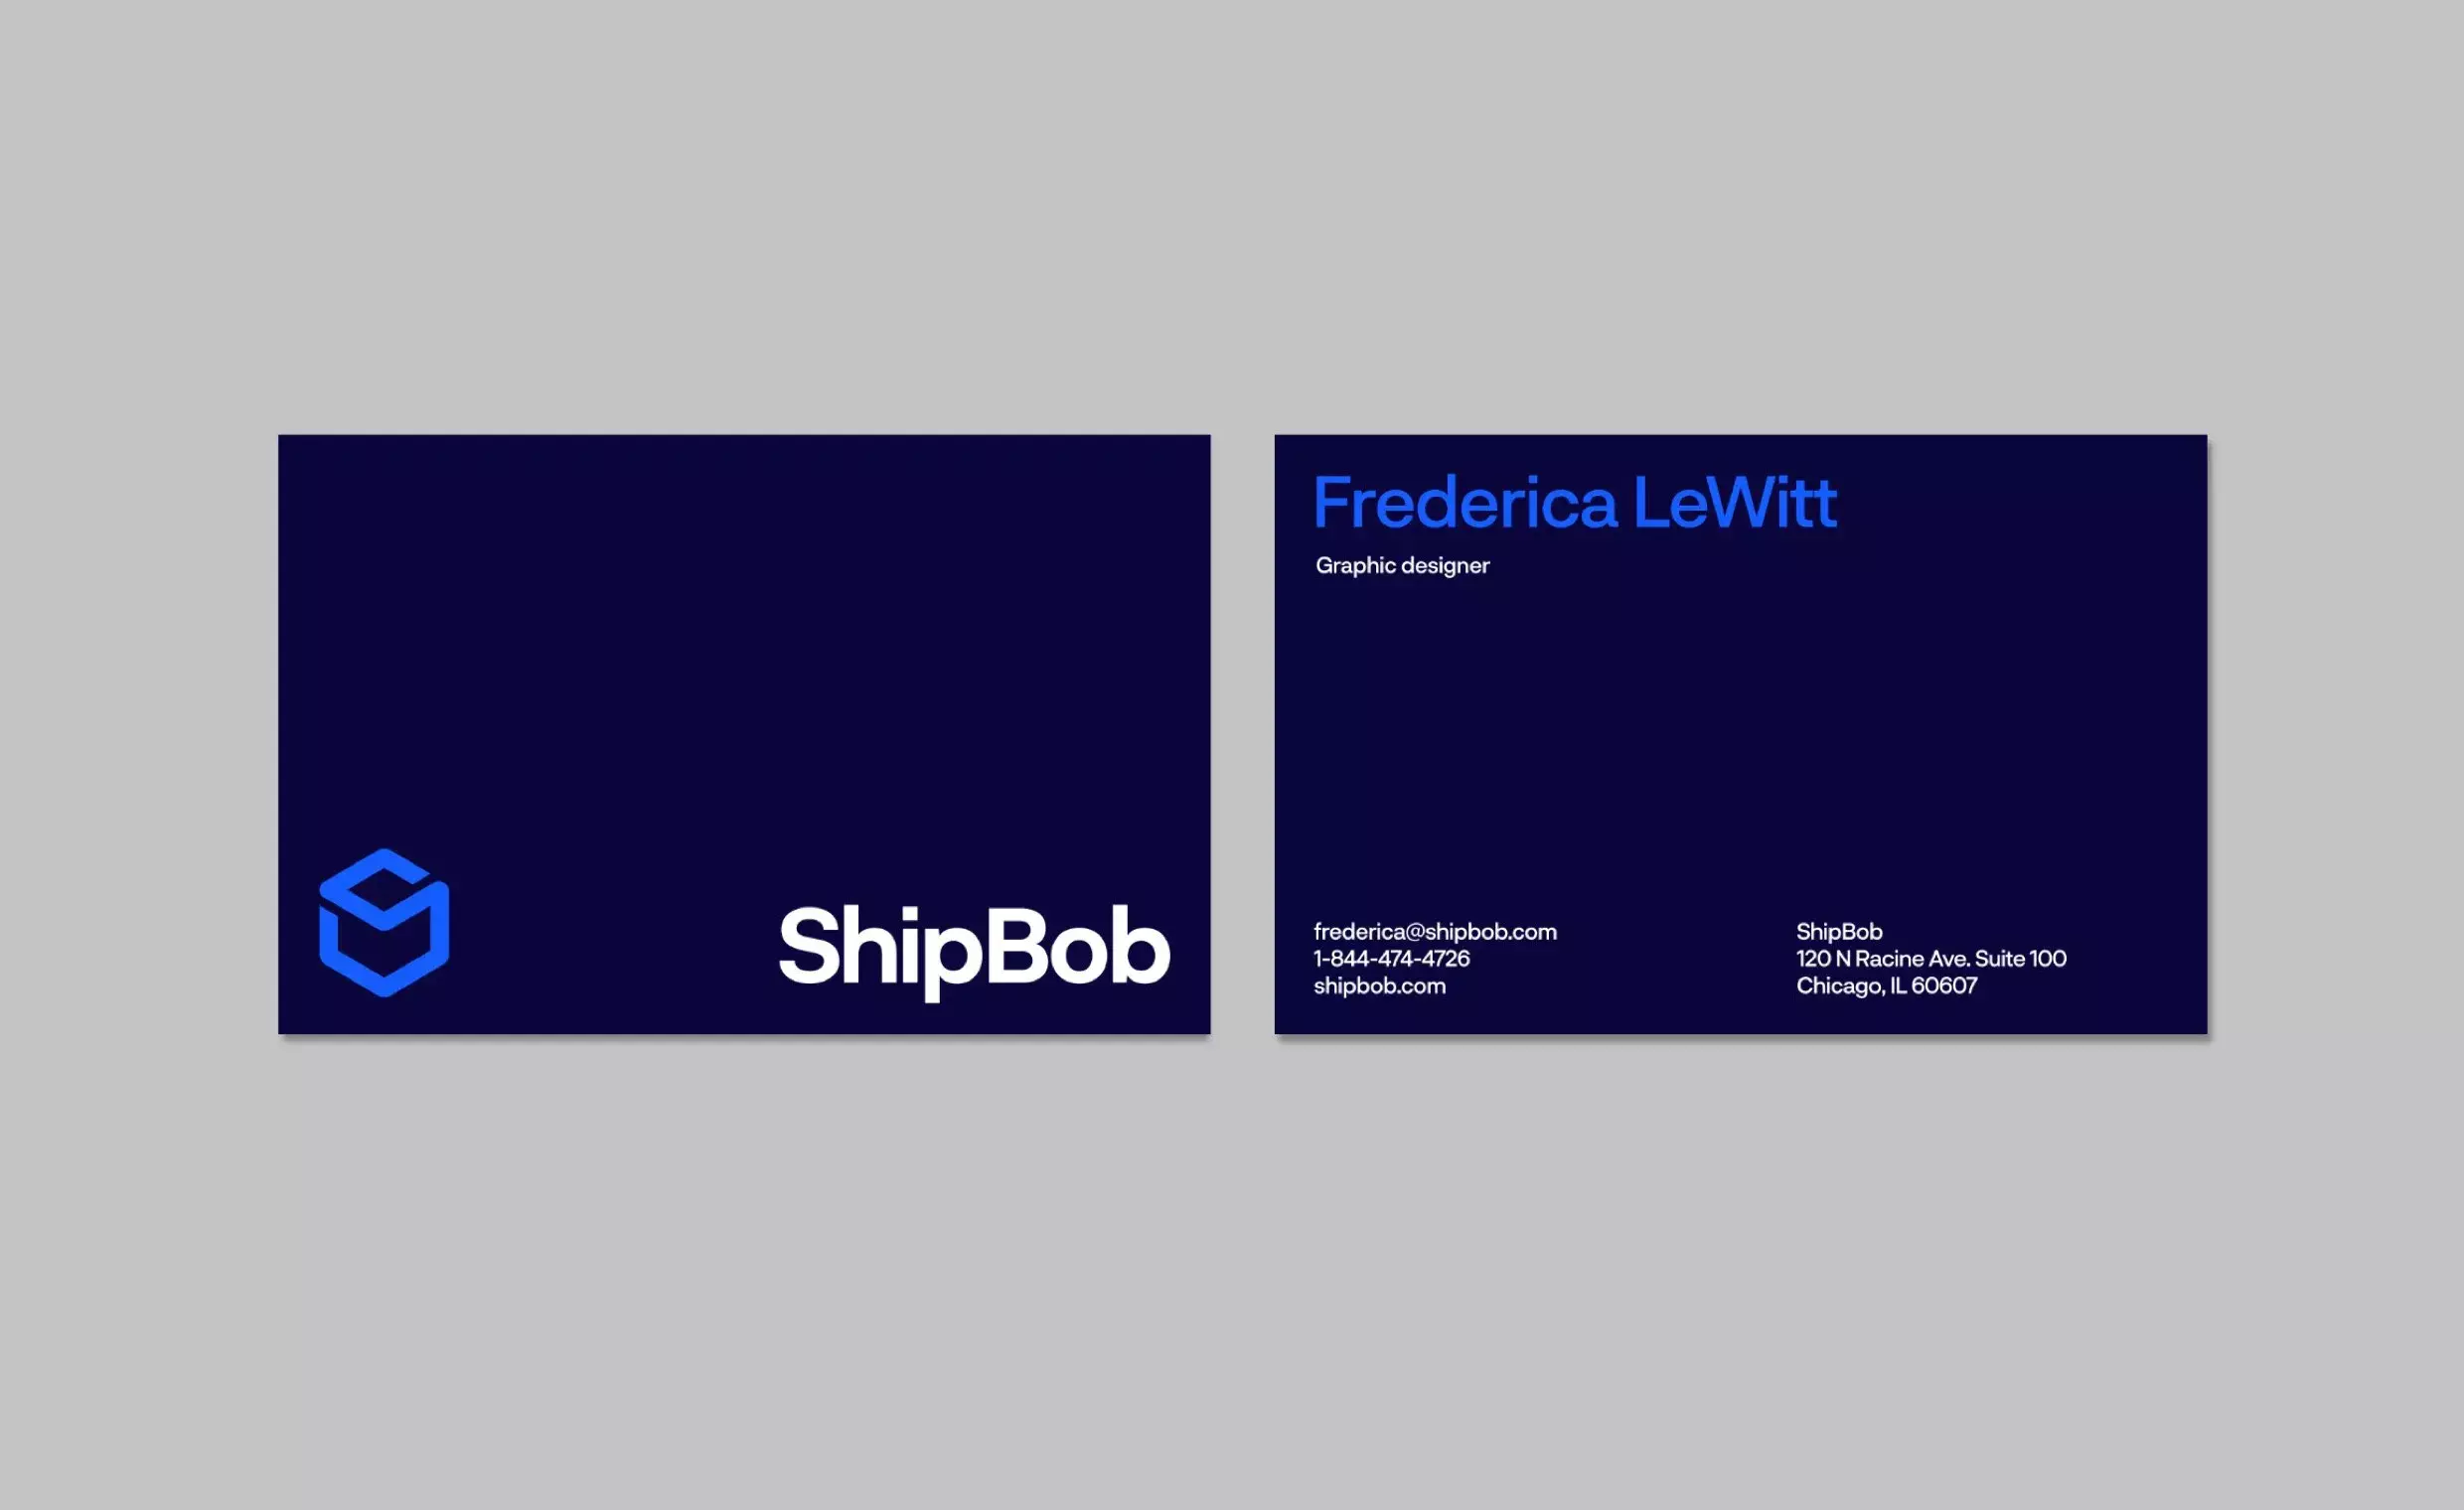 Shipbob business card mockup by BB Agency